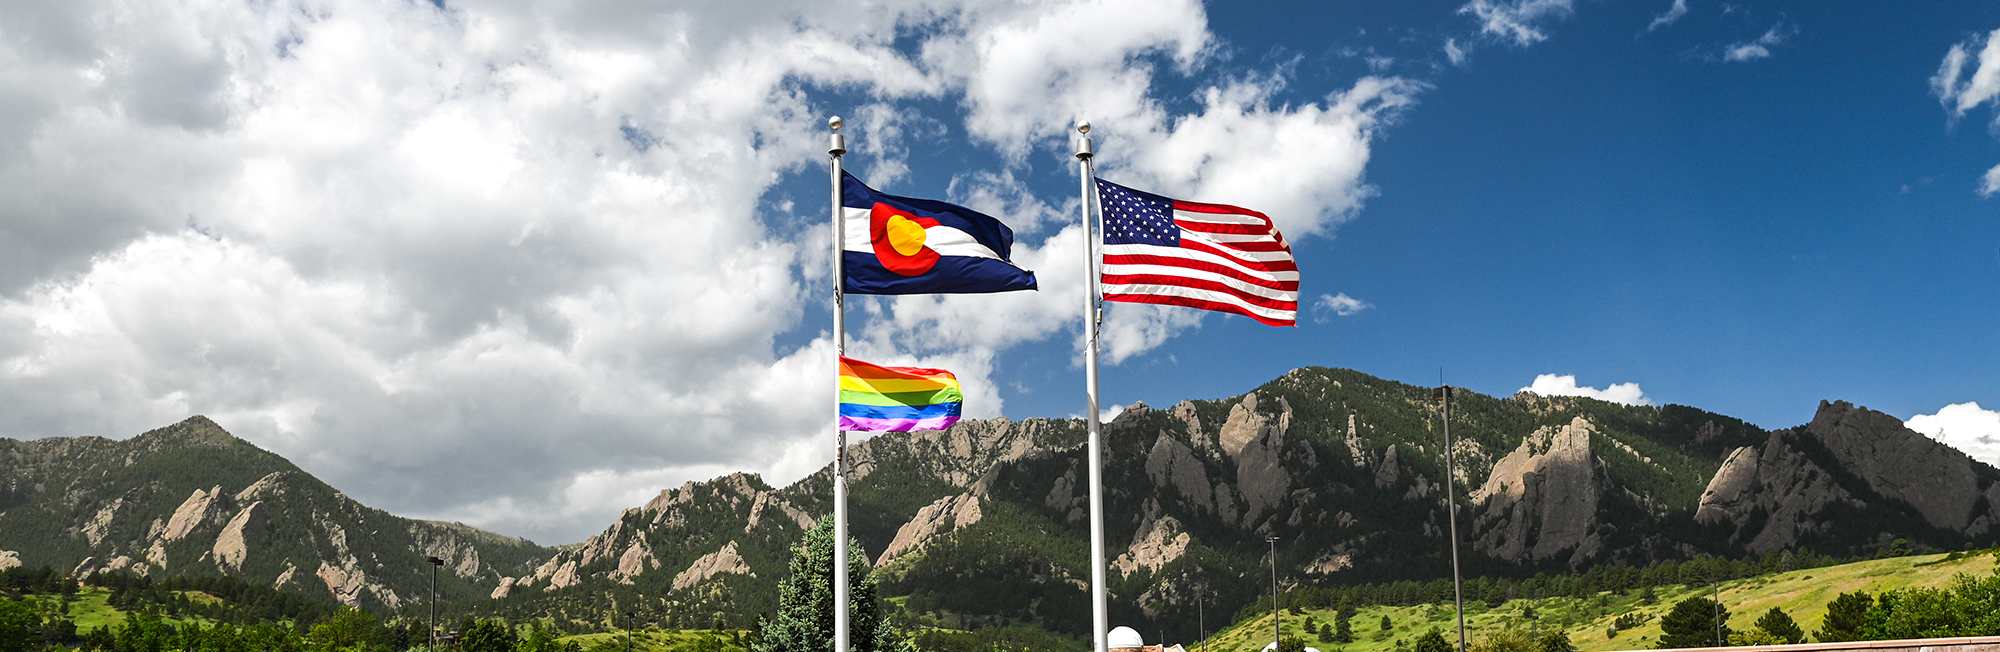 flag poles at the DSRC fly the United States of America flag, the State of Colorado flag, and the Pride flag